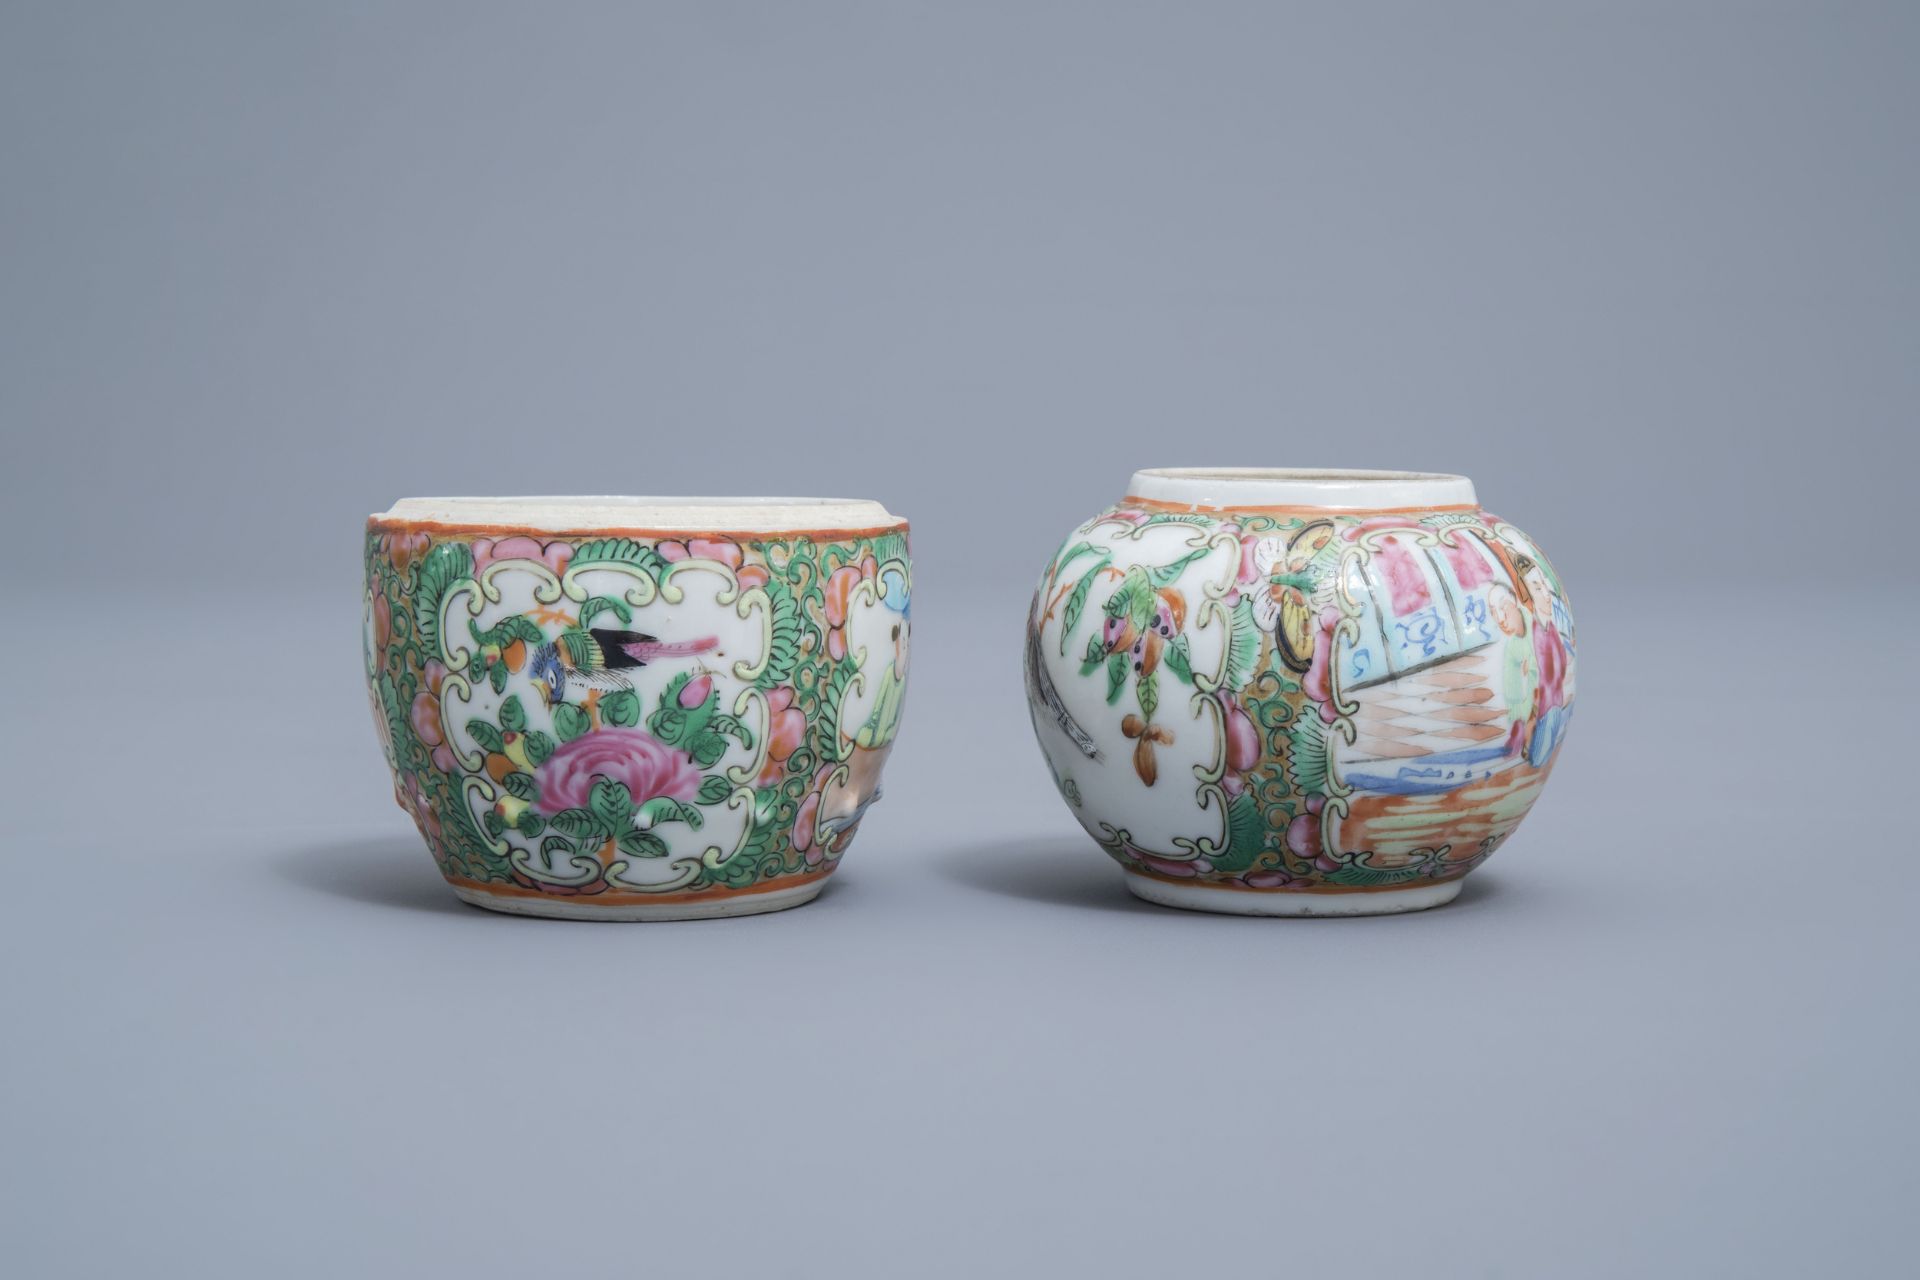 A varied collection of Chinse Canton and famille rose porcelain, 19th C. - Image 15 of 19